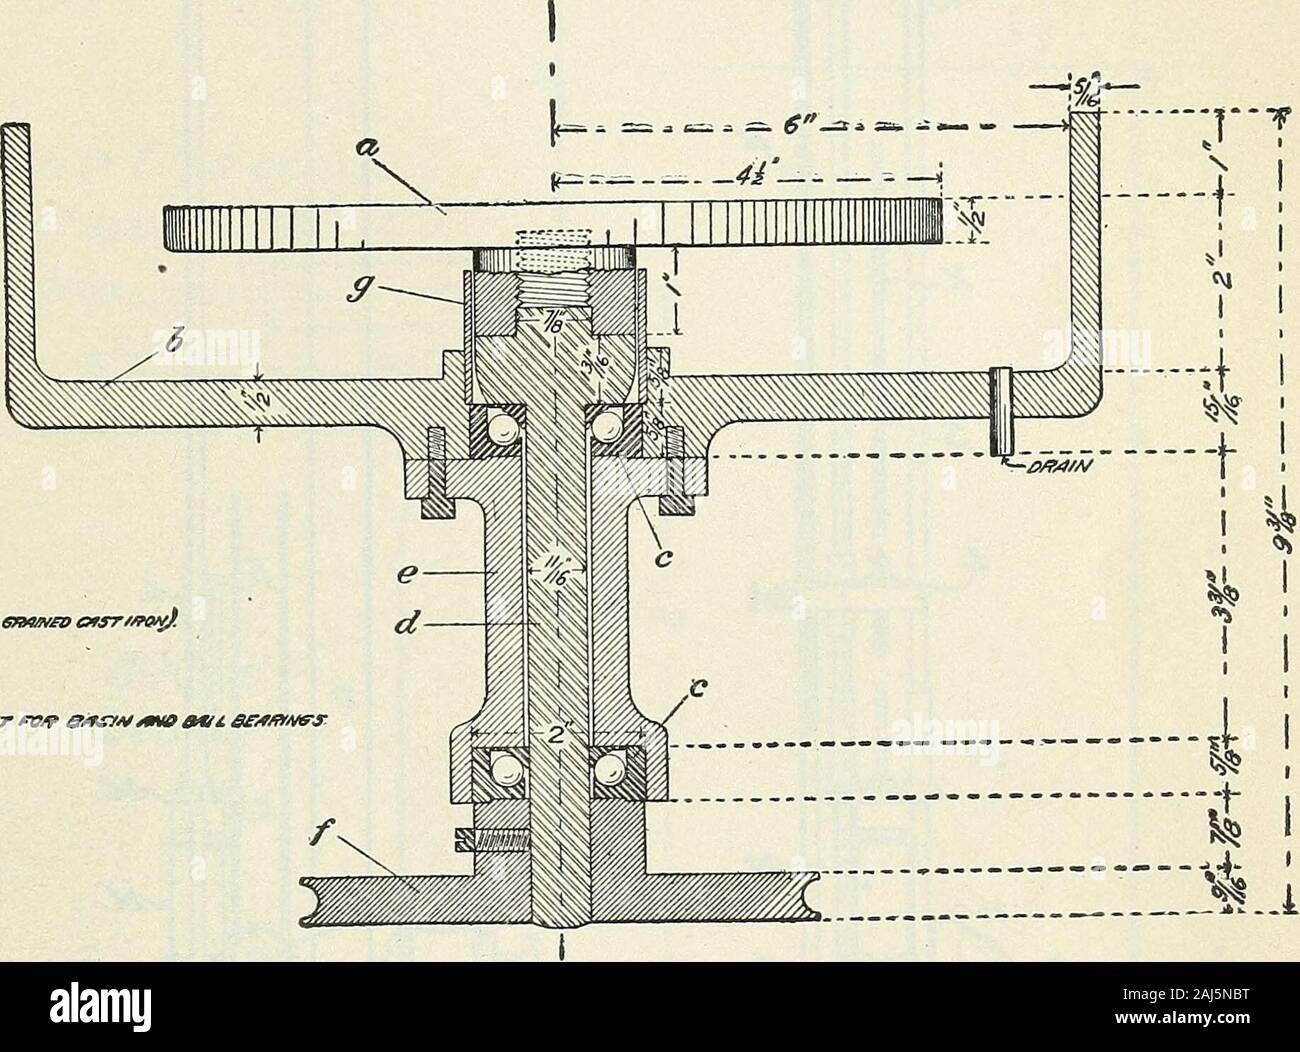 Standard and tentative methods of sampling and testing highway materials : recommended by the Second Conference of State Highway Testing Engineers and Chemists, Washington, D.C., Feb 23-27, 1920 . ngth. (5) Any form of impact machine which will comply with the following essentialsmav he used in making the test: Satisfactory forms of diamond drill and diamond saw are shown in figs. 3 and 4. SAMPLING AND TESTING HIGHWAY MATERIALS. 7 (a) A cast-iron anvil weighing not less than 50 kg., firmly fixed upon a solid founda-tion;(6) A hammer weighing 2 kg., arranged so as to fall freely between suitabl Stock Photo